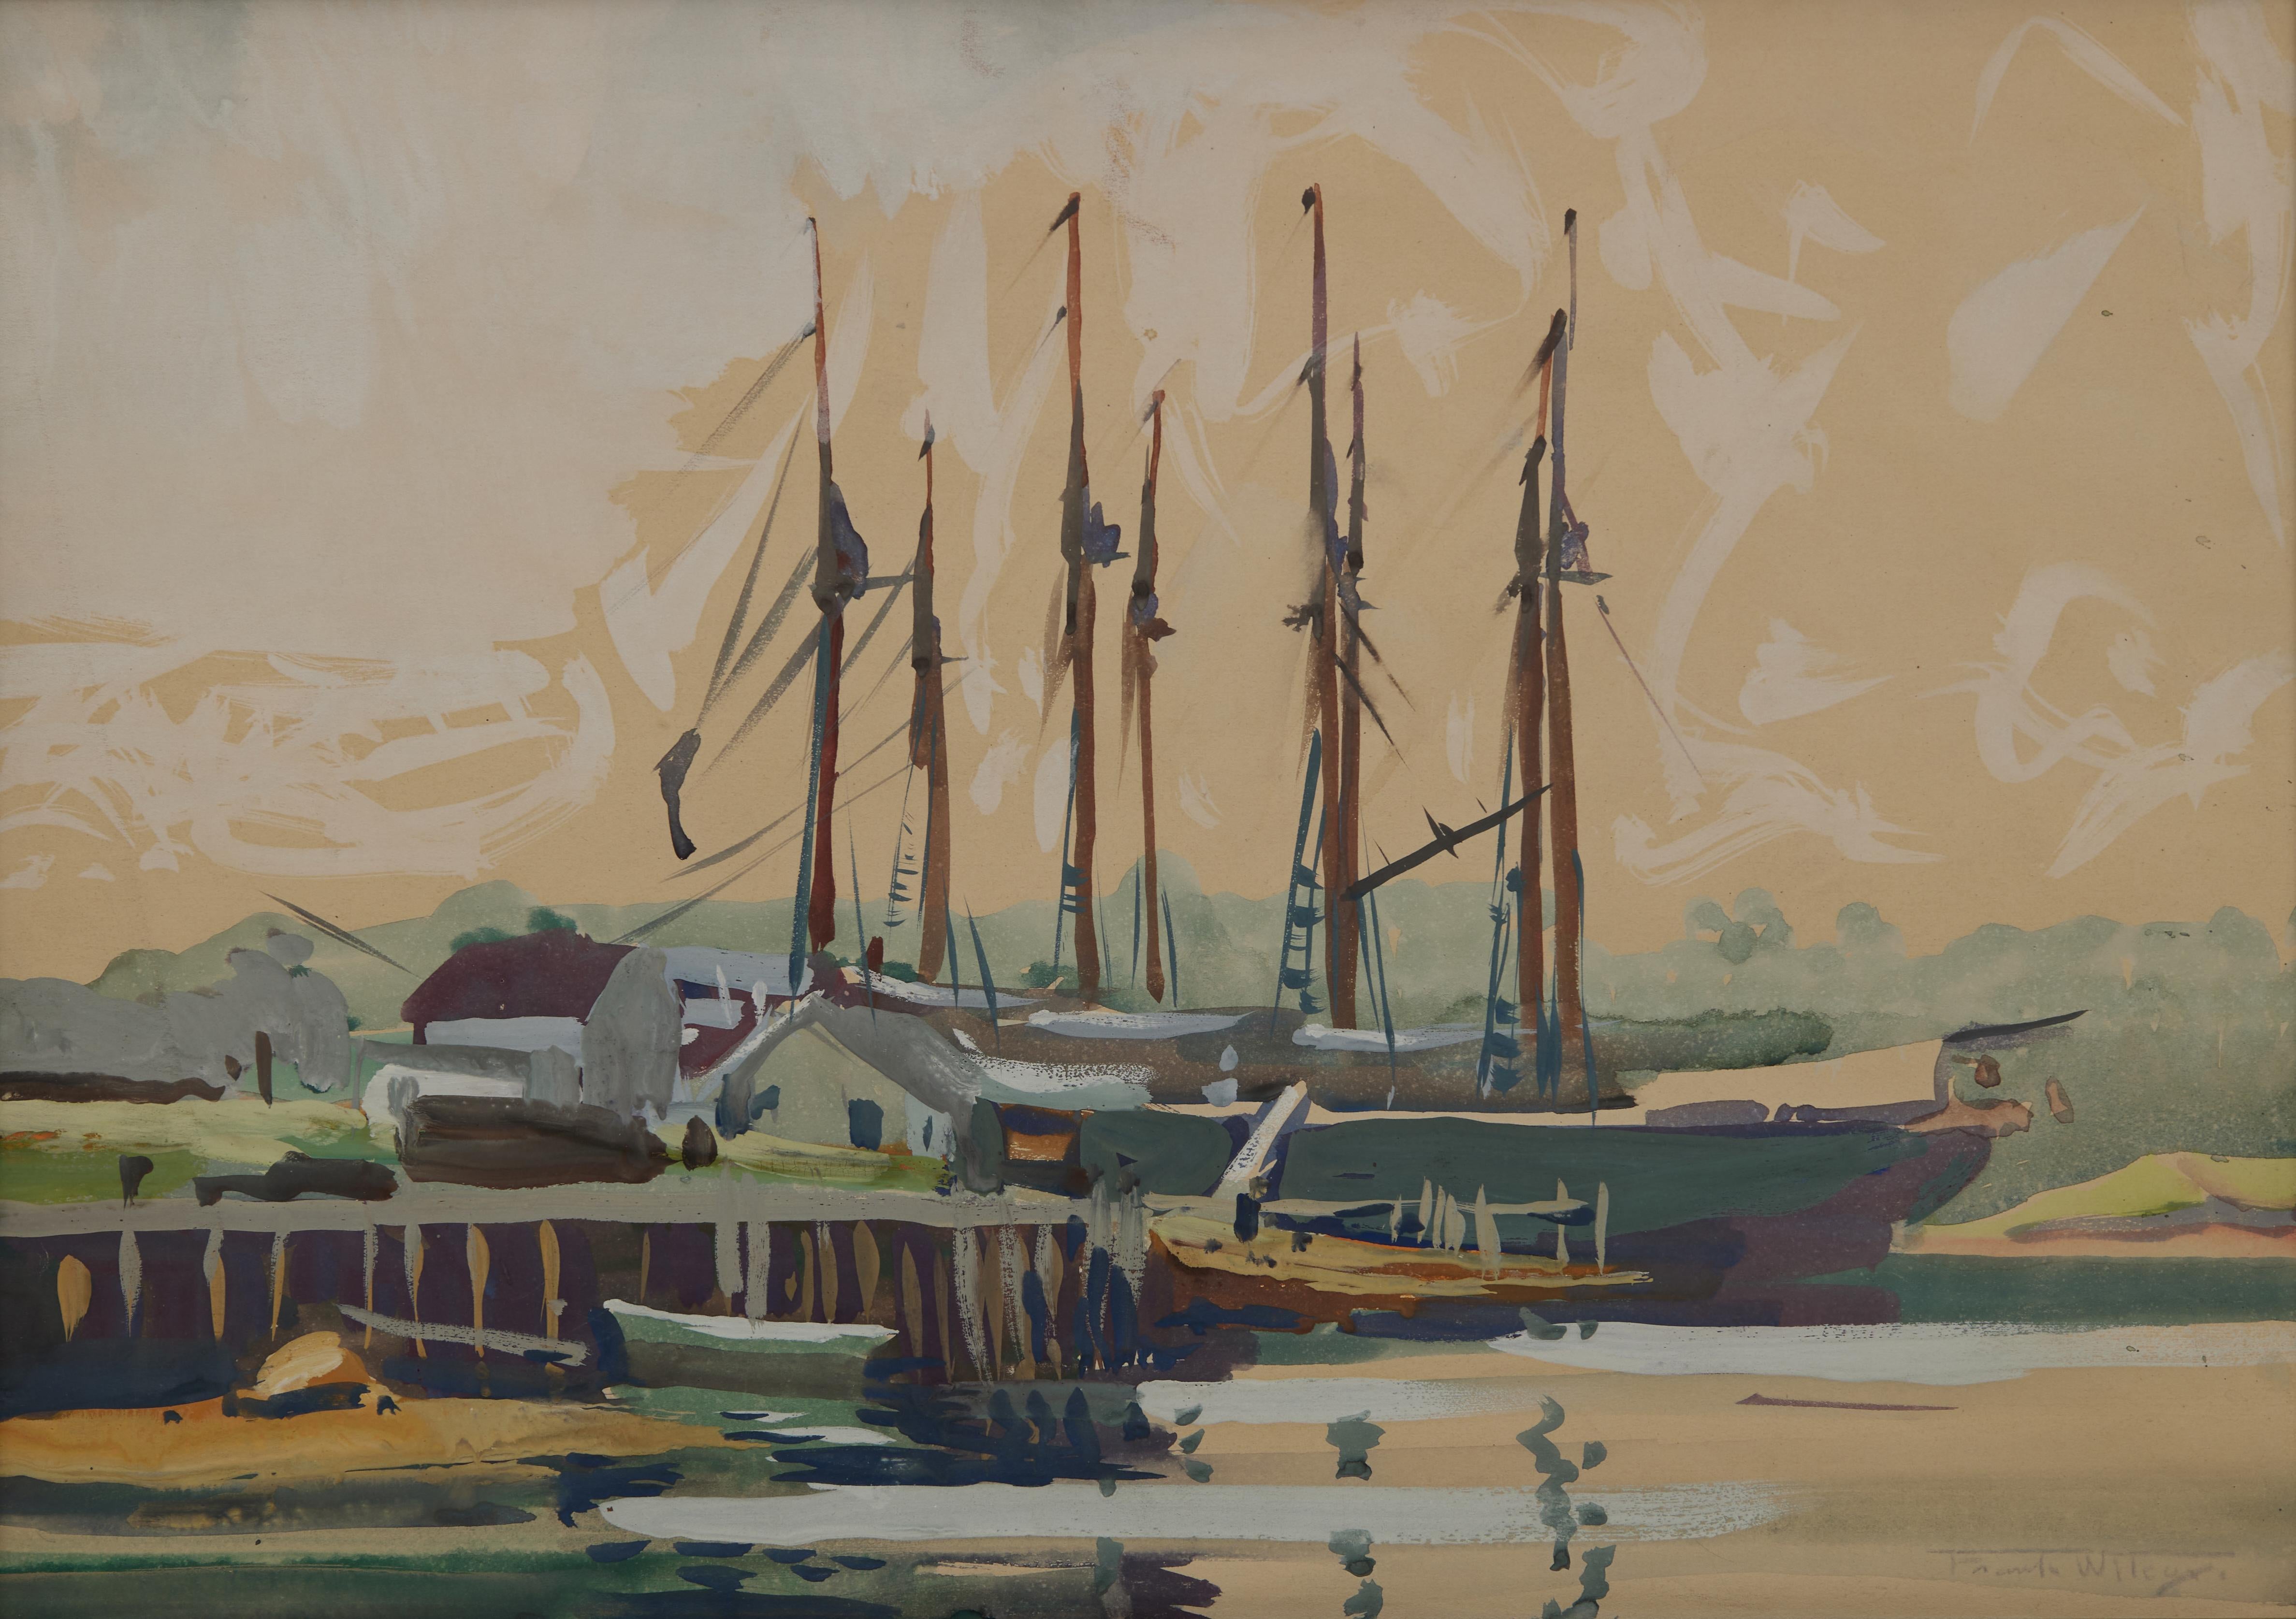 Schooner, Boothbay Harbor, Maine, Early 20th Century Seascape Watercolor - American Modern Painting by Frank Wilcox